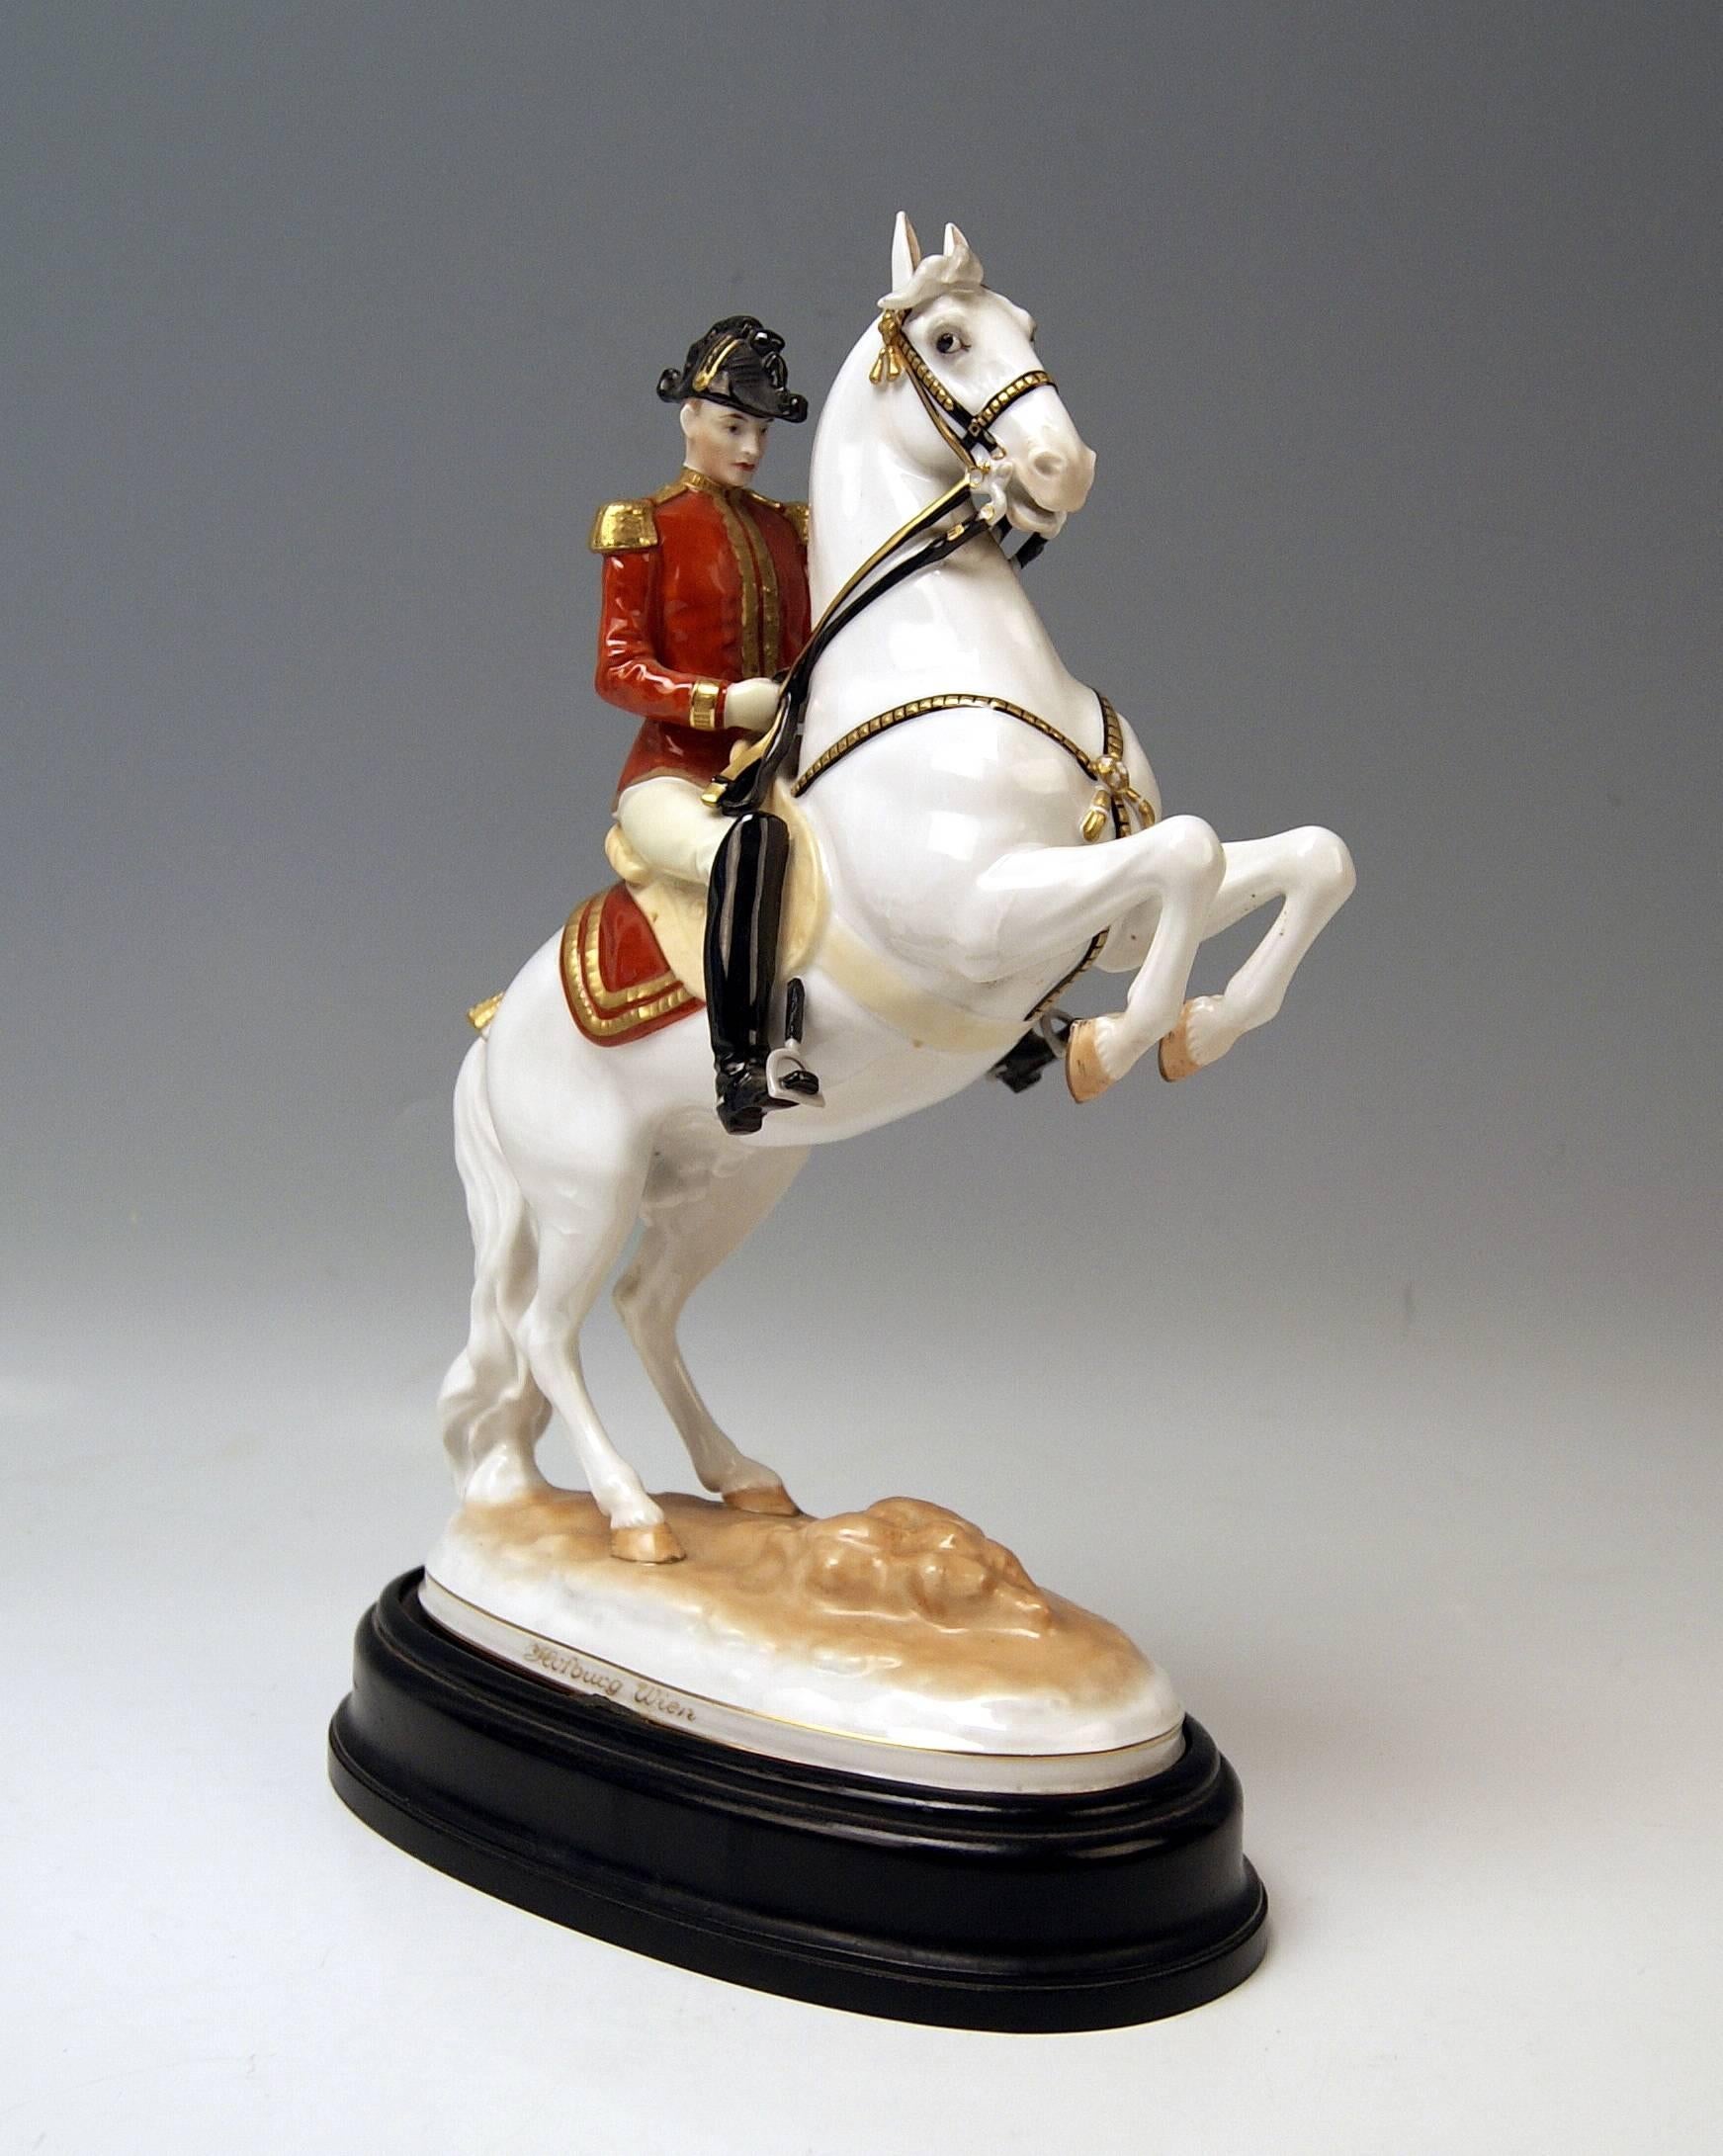 Vienna Augarten Horse Spanish Riding School
Figurine type: Courbette
The model was created by Prof. Albin Döbrich, circa 1926

The rider- conducting the horse by the reins- sits on the jumping white Lipizzan which is rearing up. The jumping